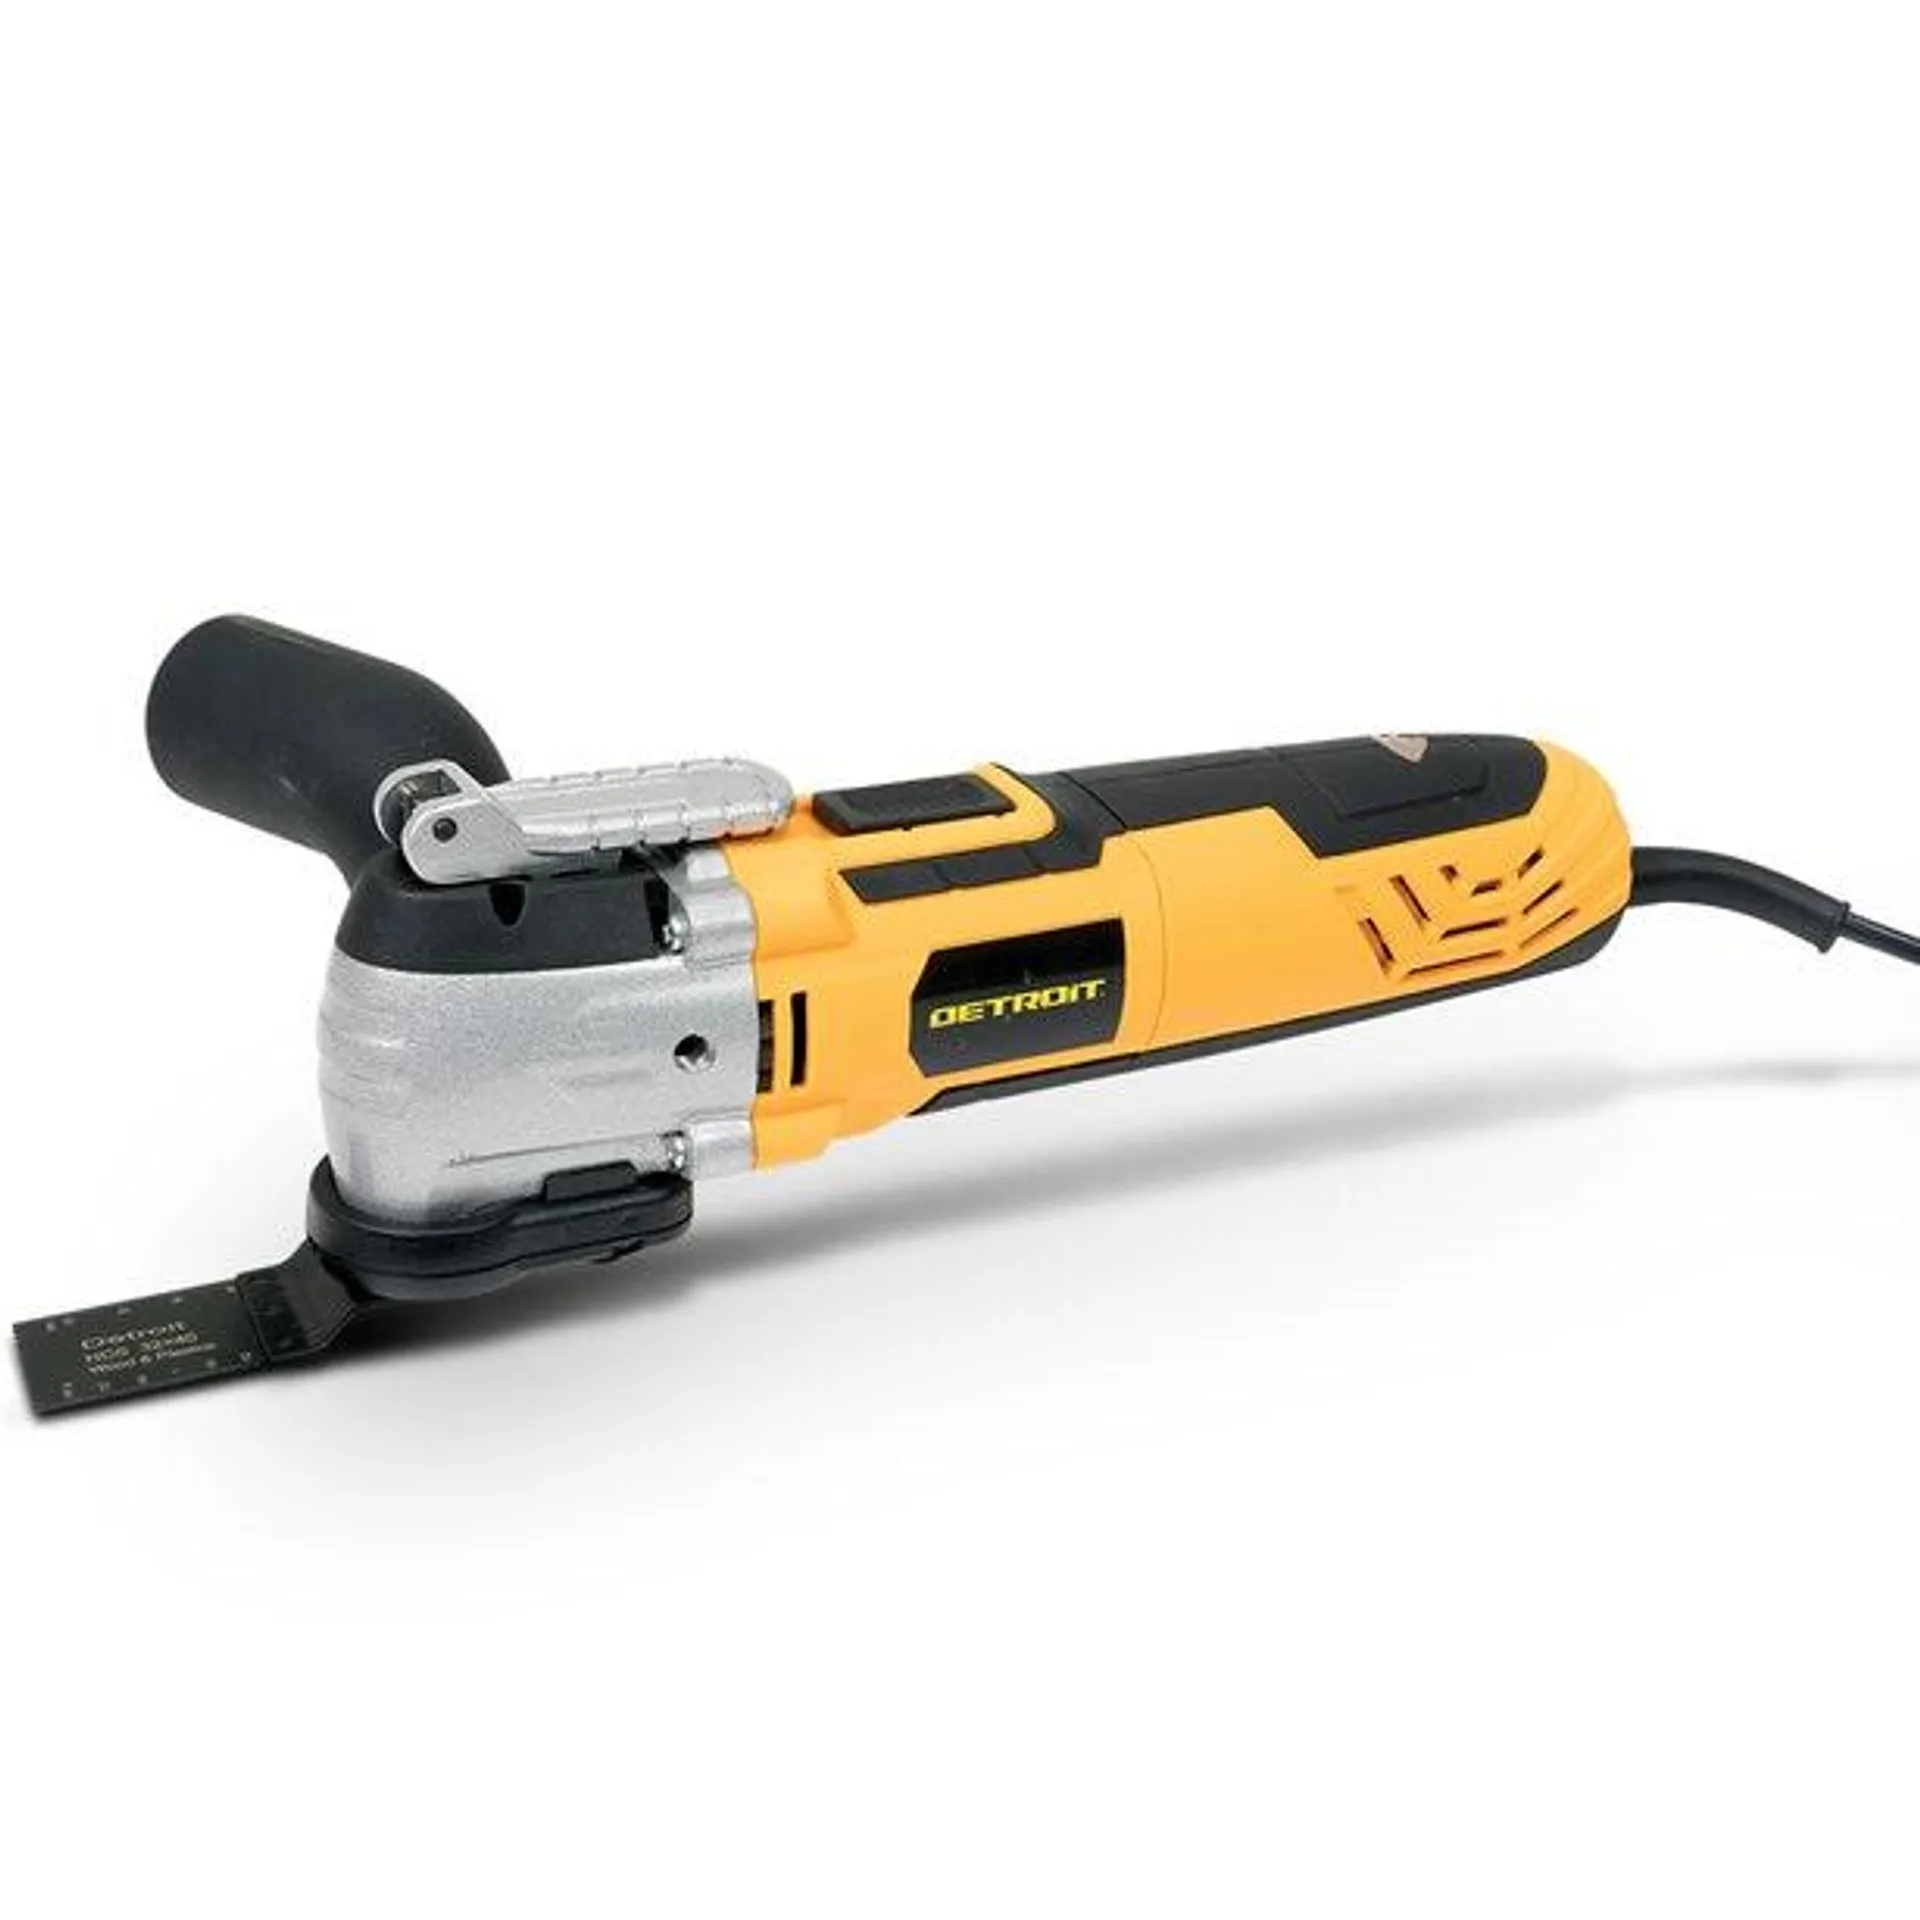 DETROIT 400W Oscillating Quick-Release Multi-Tool DMT400W